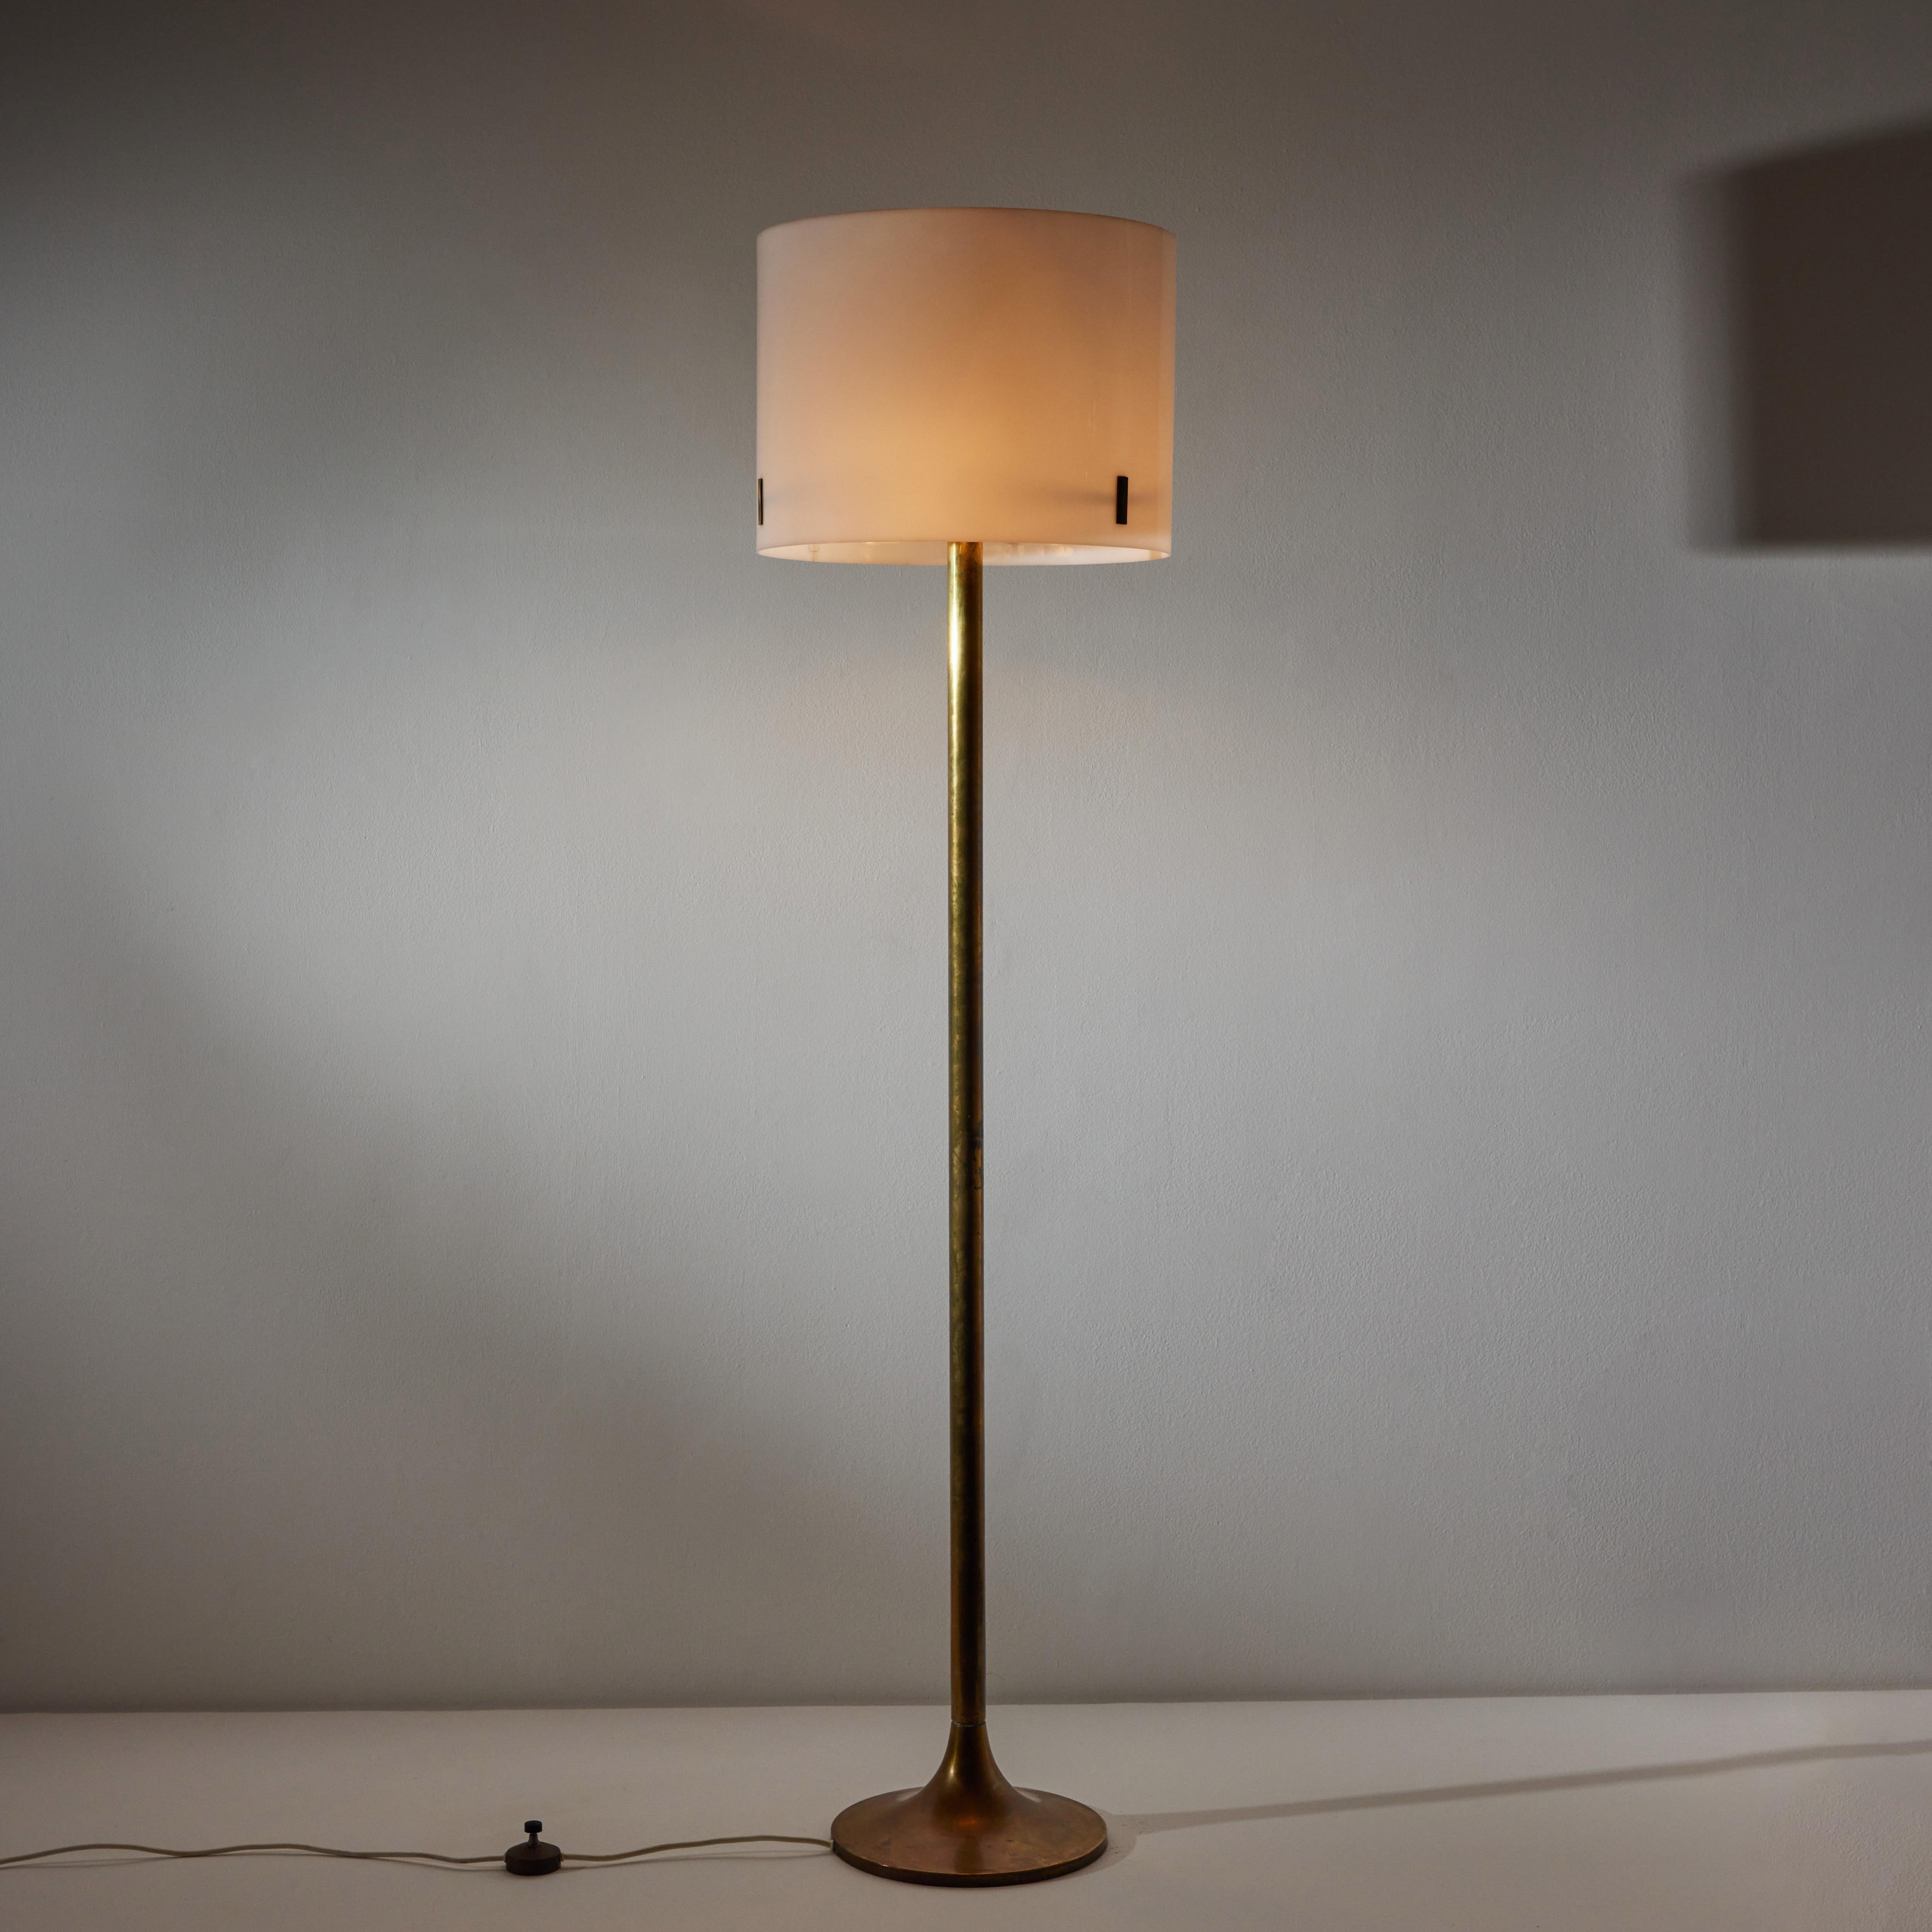 Floor lamp by Oluce. Manufactured in Italy, circa 1960's. Acrylic shade, brass stem and base. Original European cord with step switch. We recommend one E27 60w maximum bulbs for the uplight and three E27 60w bulbs for the downlight. Bulbs provided